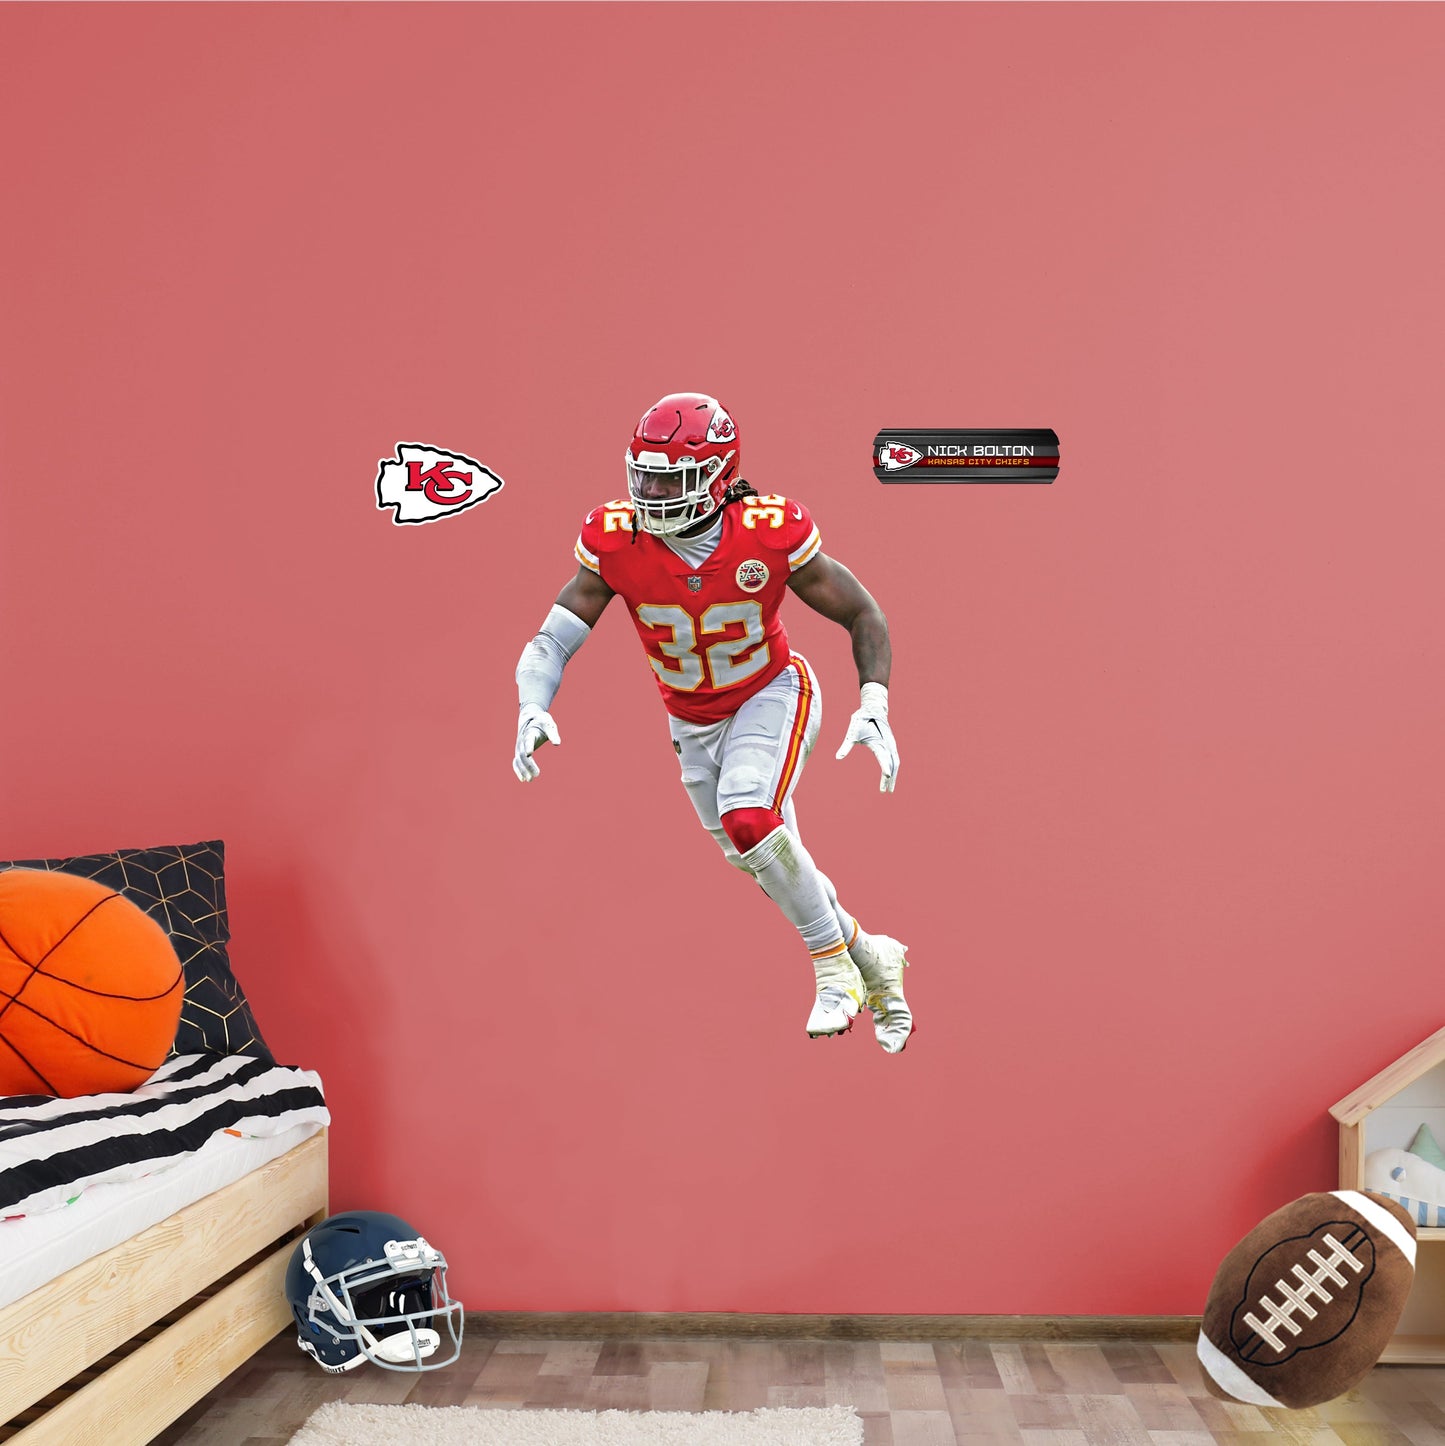 Kansas City Chiefs: Nick Bolton - Officially Licensed NFL Removable Adhesive Decal